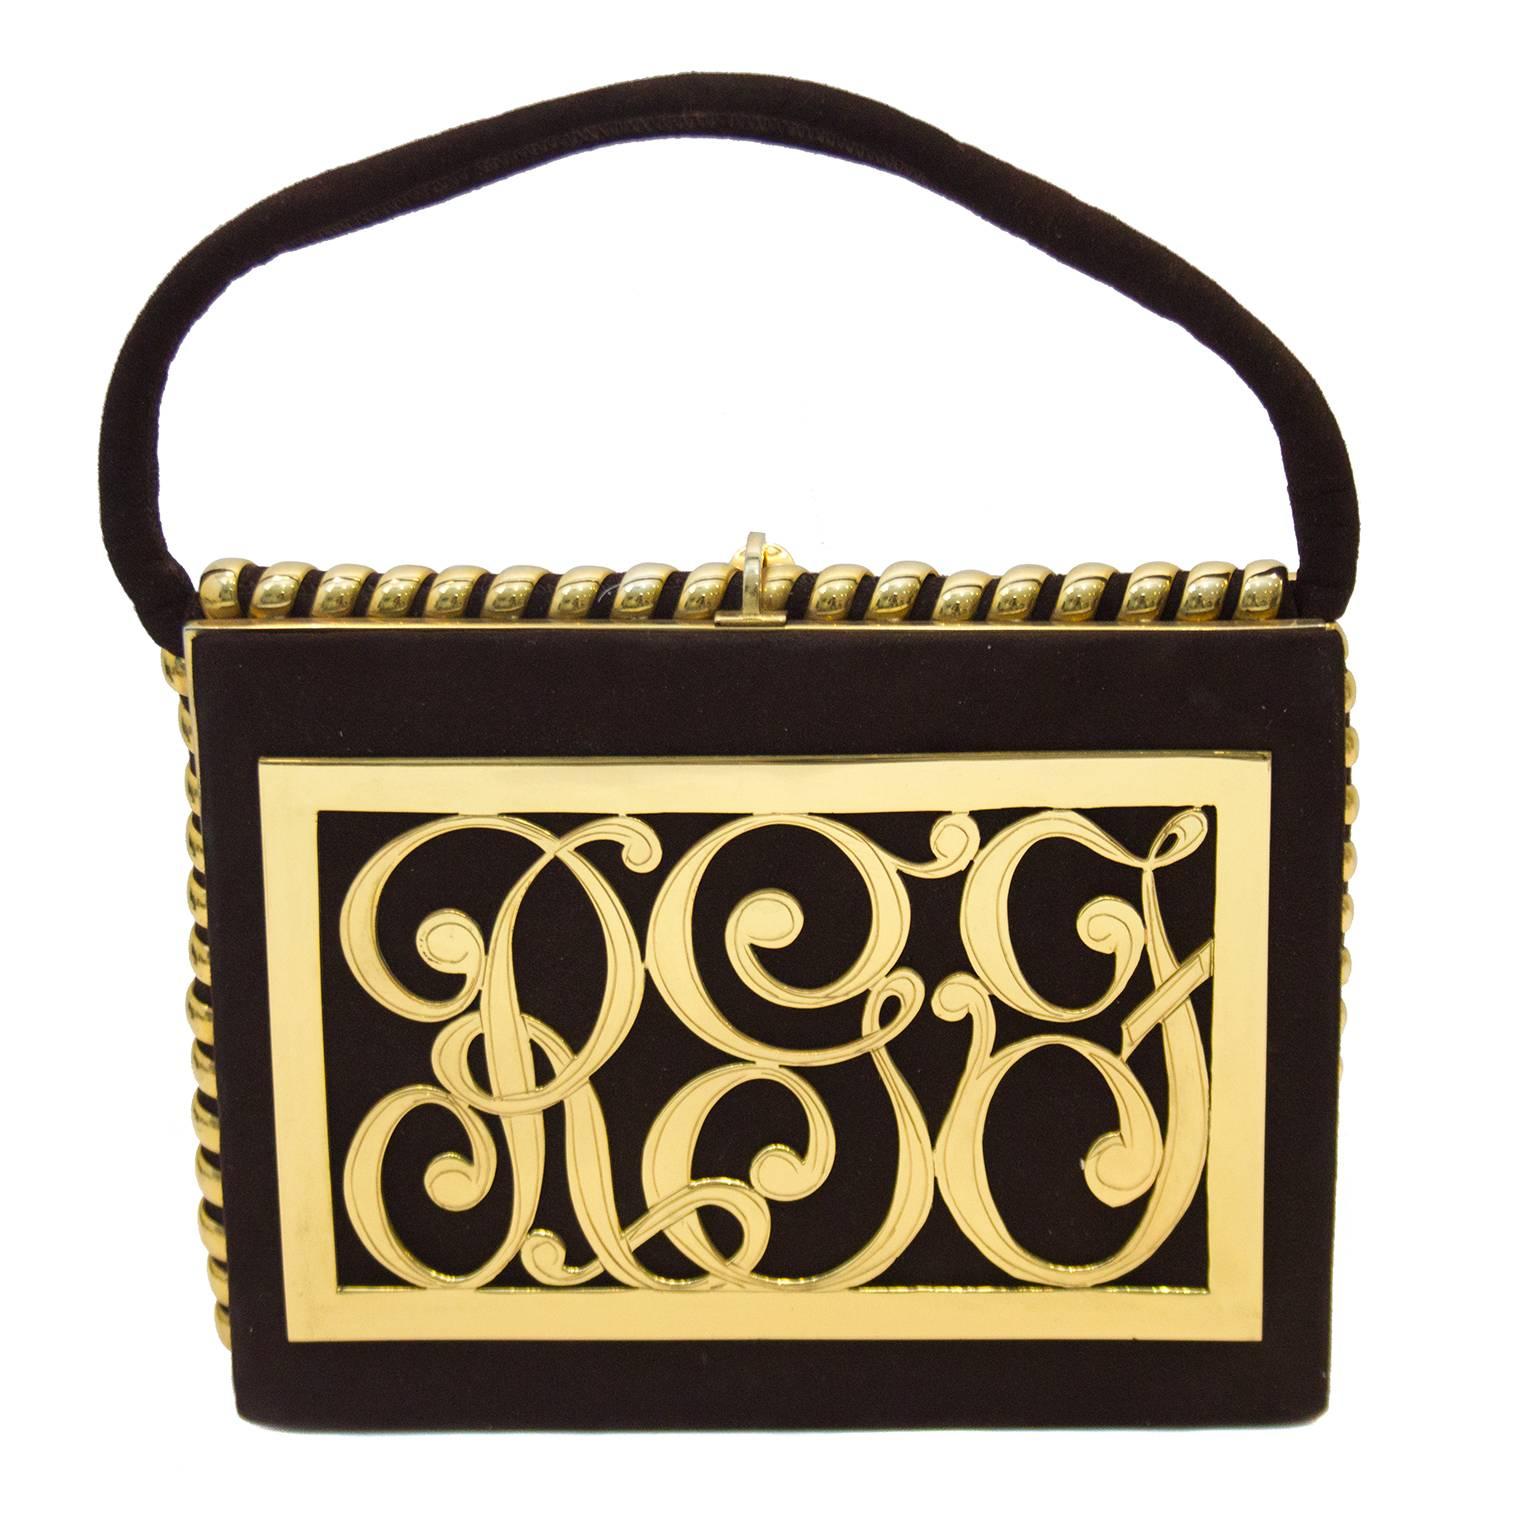 Interesting 1940s brown doe skin evening bag with gold tone cut metal large initials R.G.F. Spiral gold tone metal trim. Cream satin interior with suede trim. In its day this was a luxury item of extraordinary quality custom made for the client and